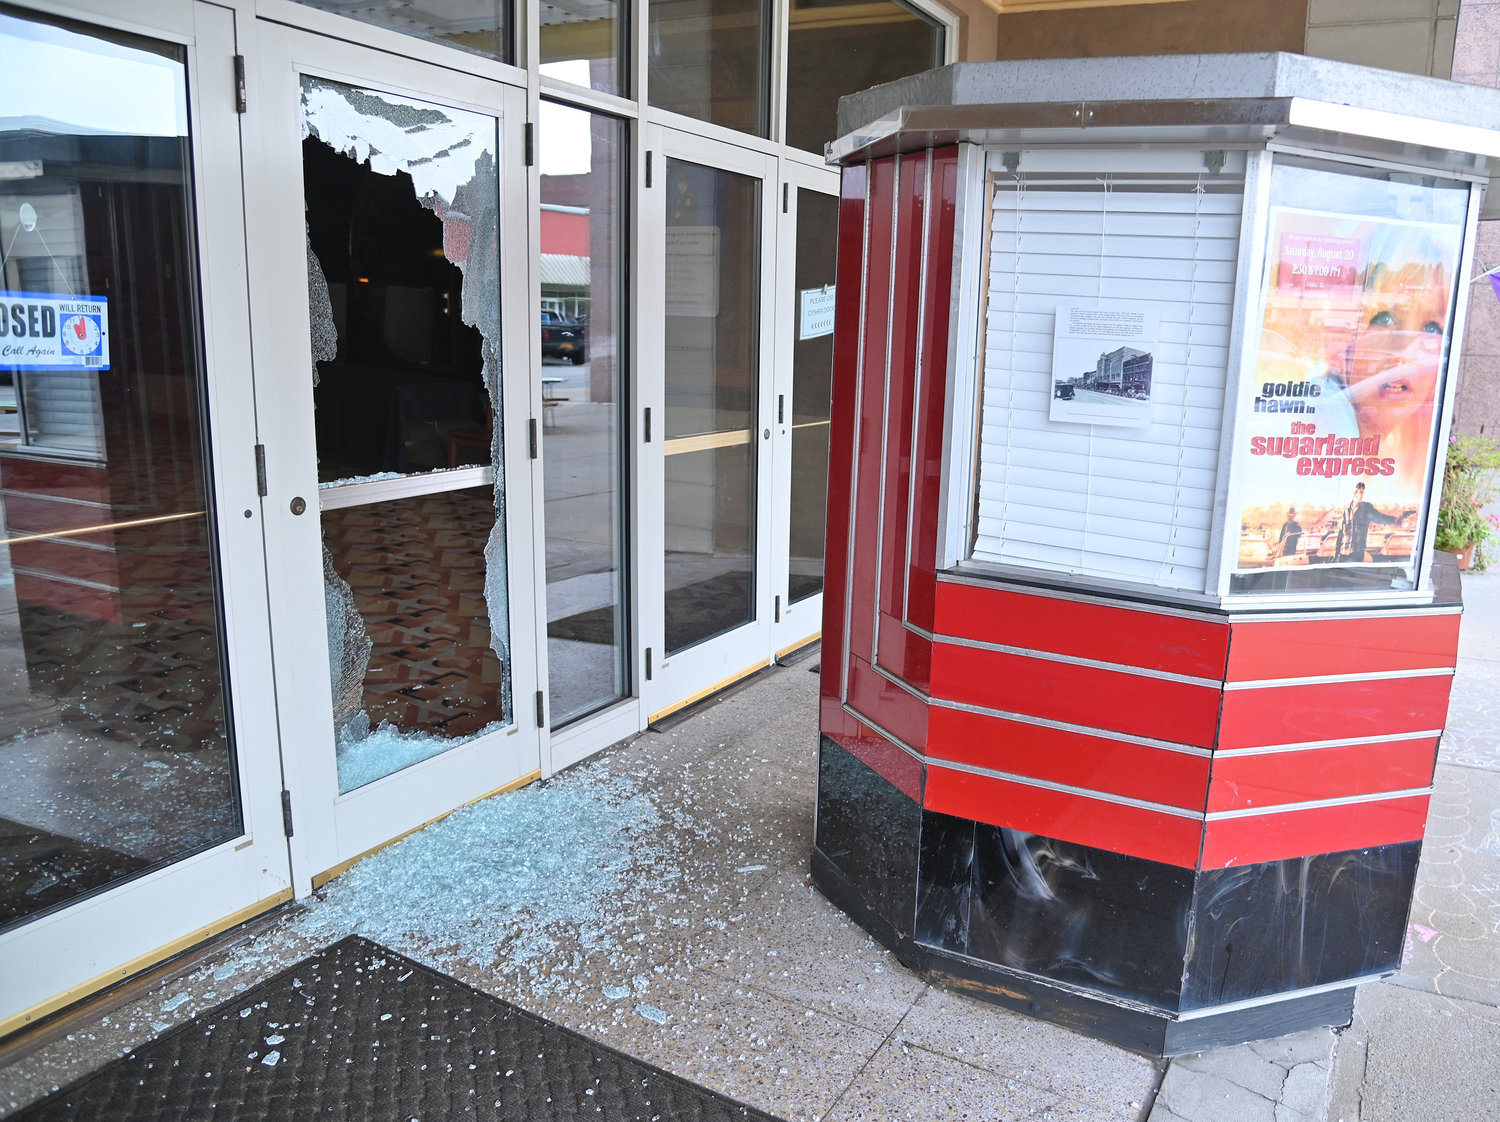 The glass front door at the Capitol Theater was smashed out during a burglary early Tuesday morning, Aug. 23.